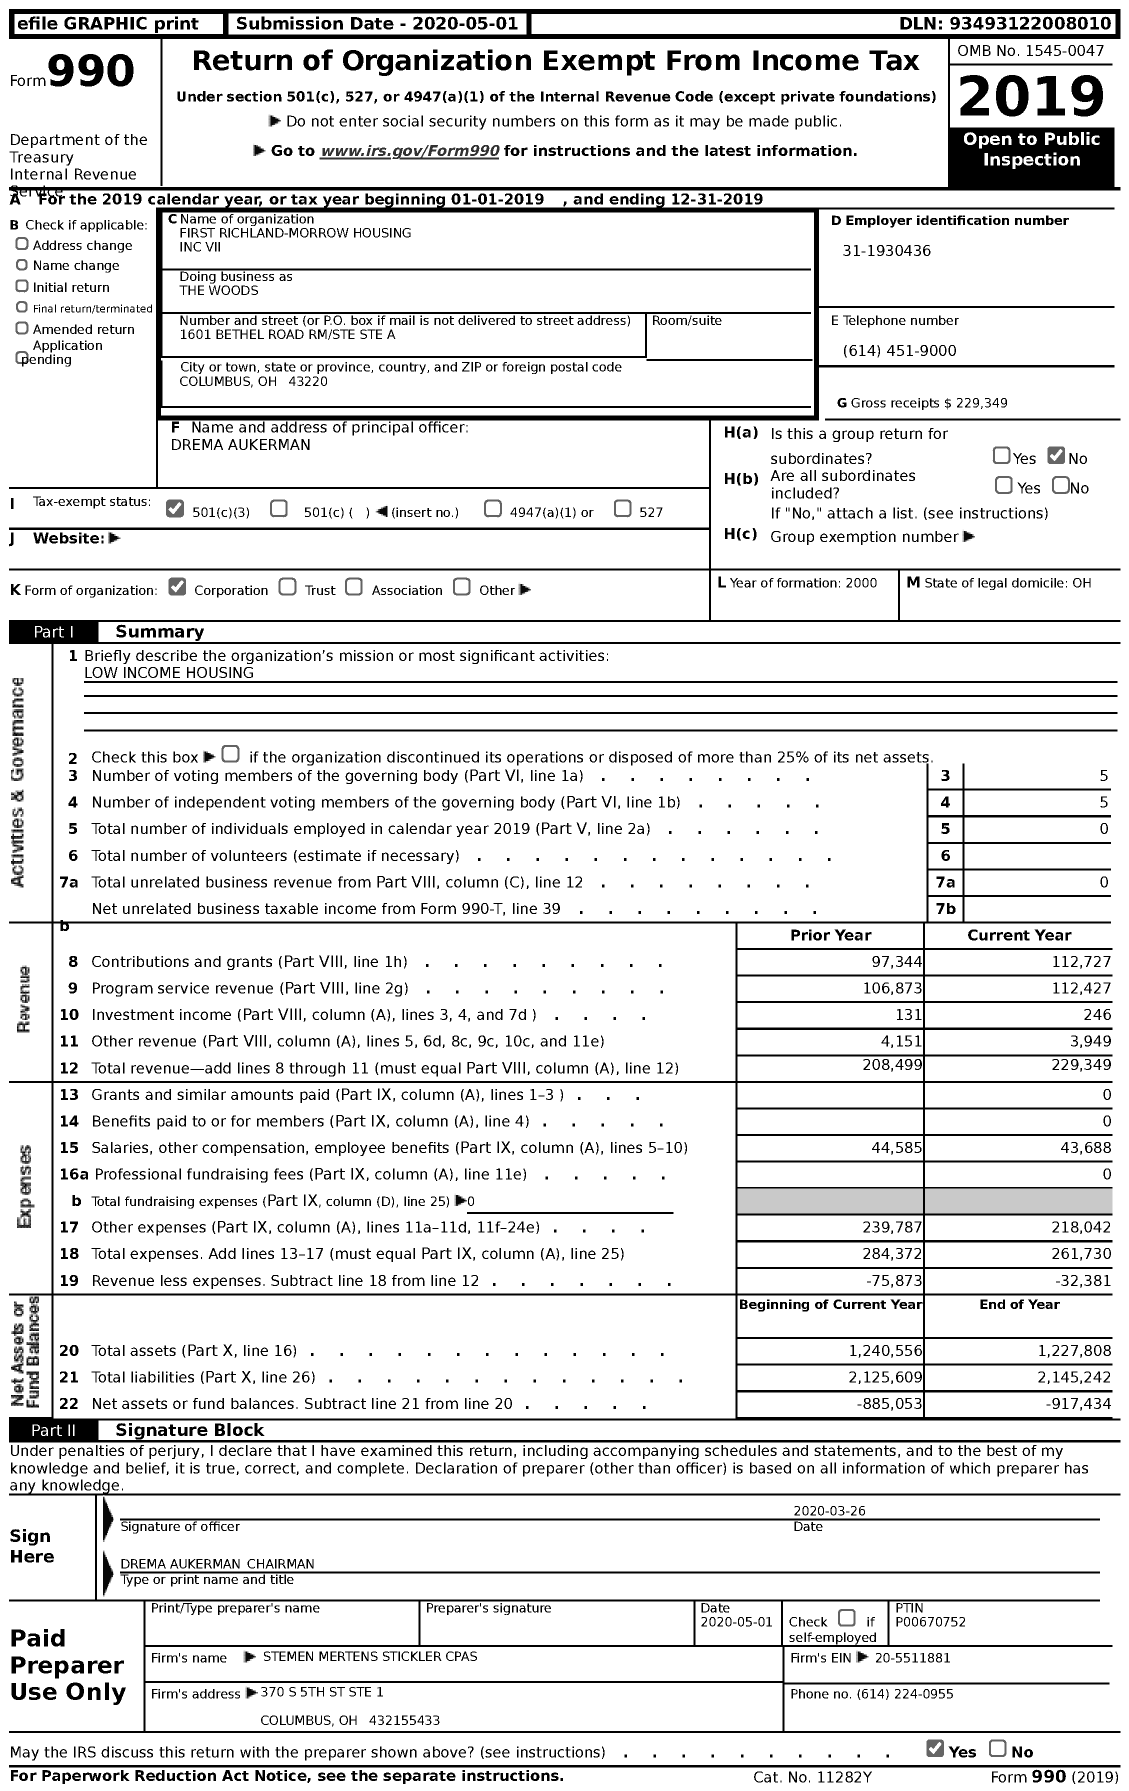 Image of first page of 2019 Form 990 for The Woods / First Richland-Morrow Housing Inc Vii